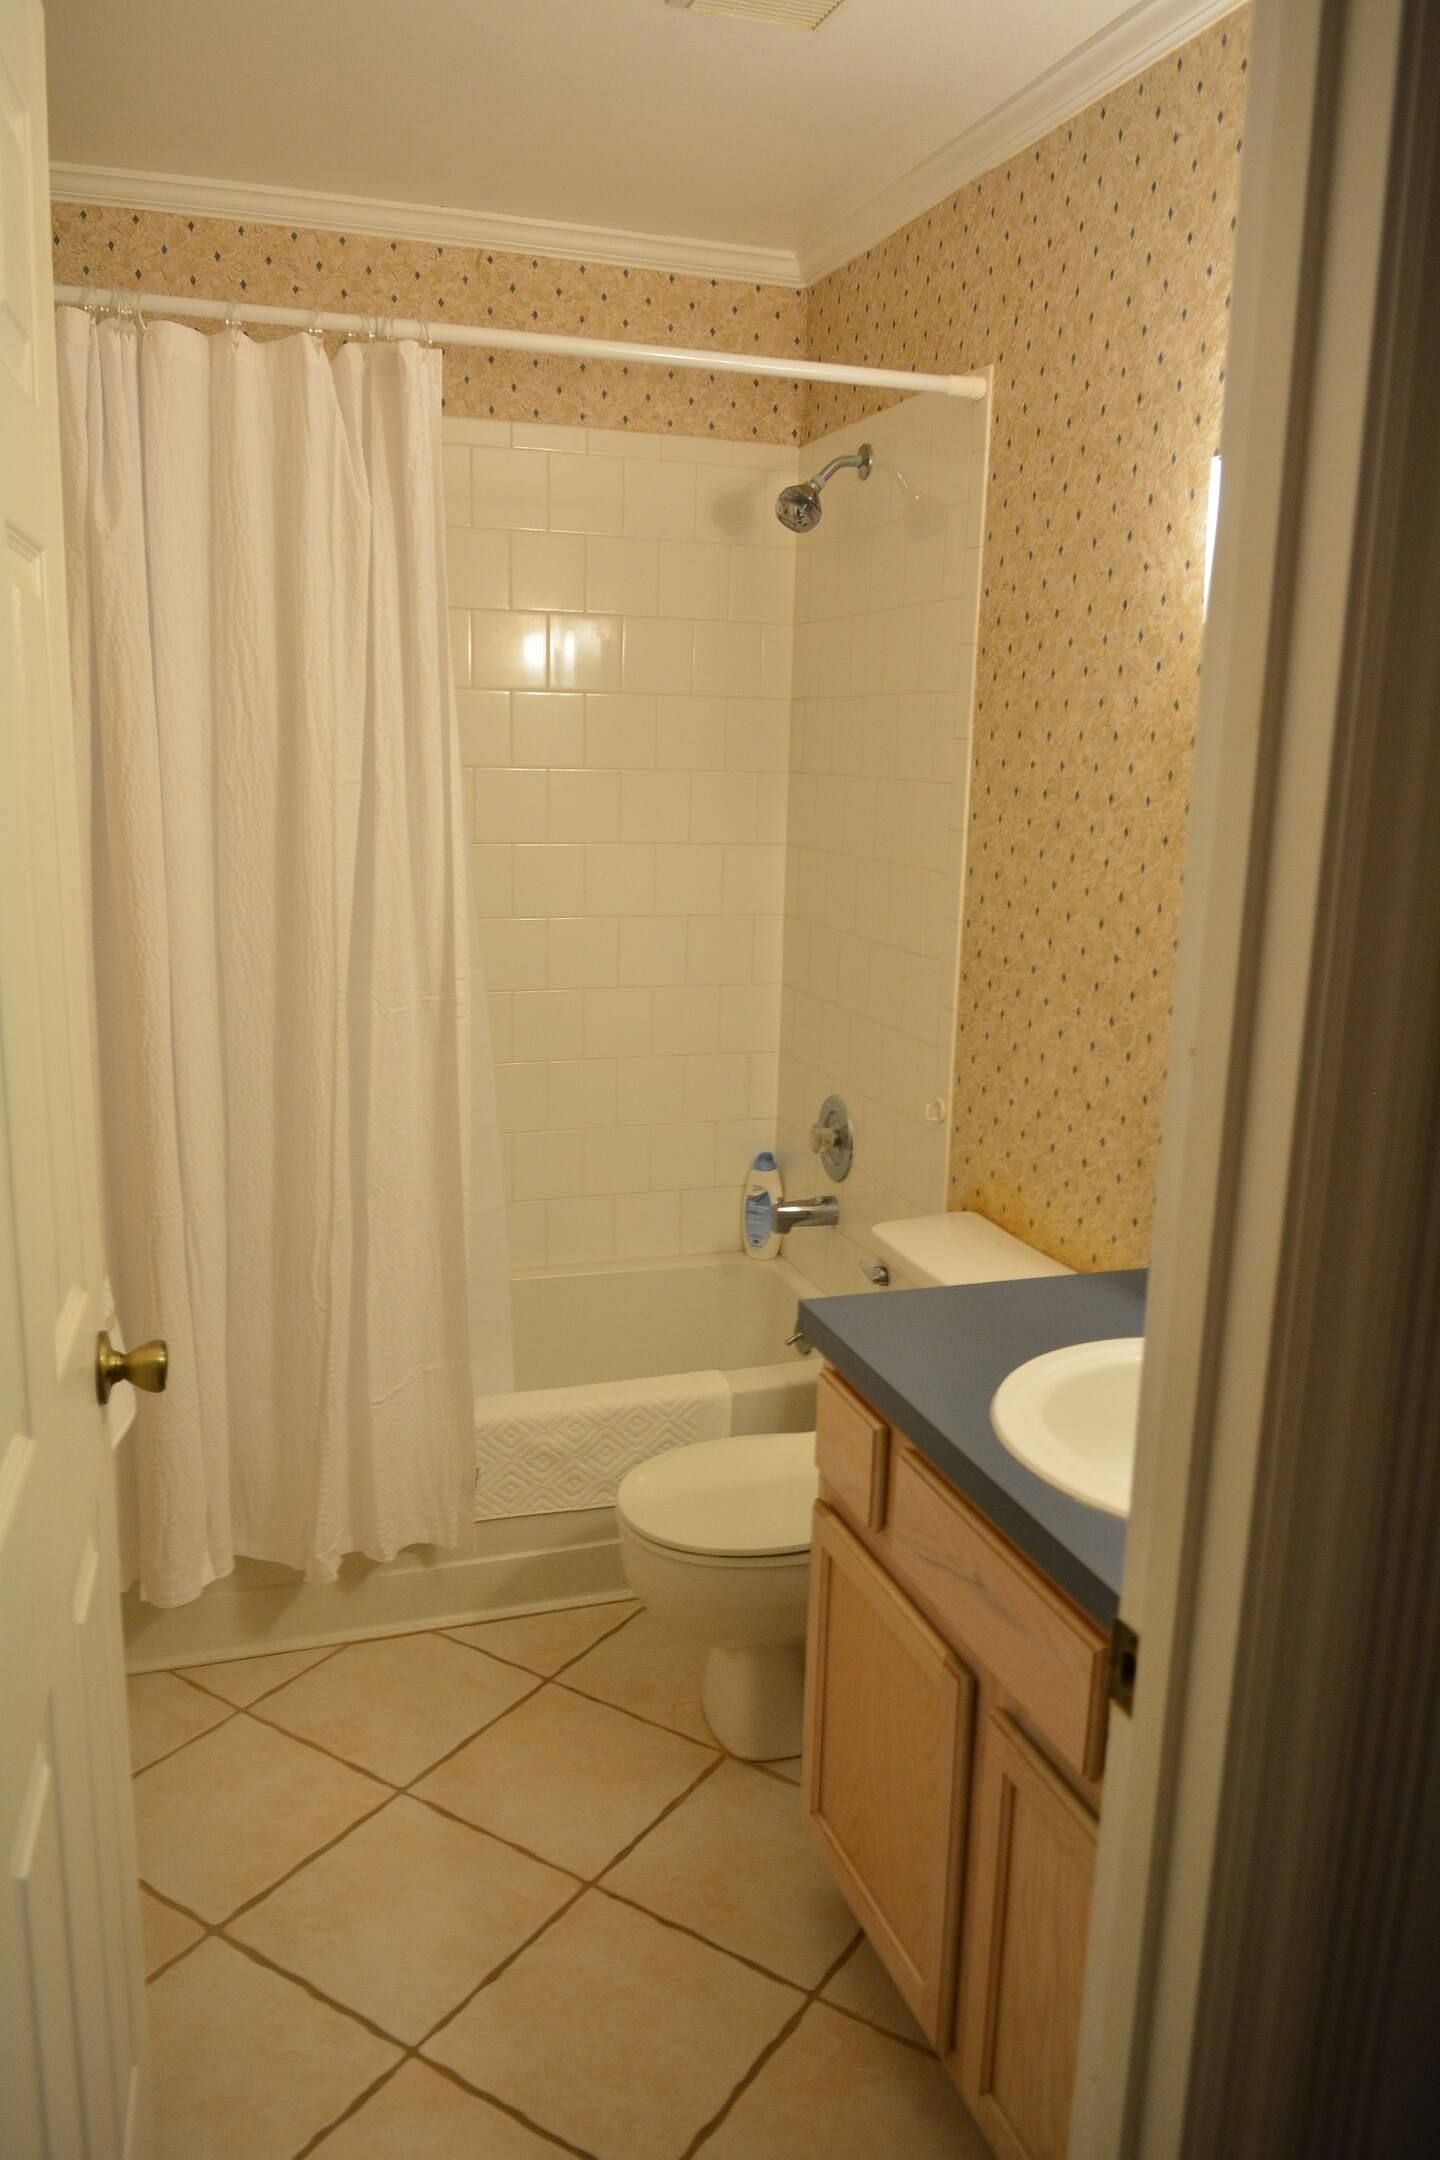 JWguest House at Orlando, Florida | Private Home with Pool, 3 Bd 2 Bath, Close to Disney | Jwbnb no brobnb 28